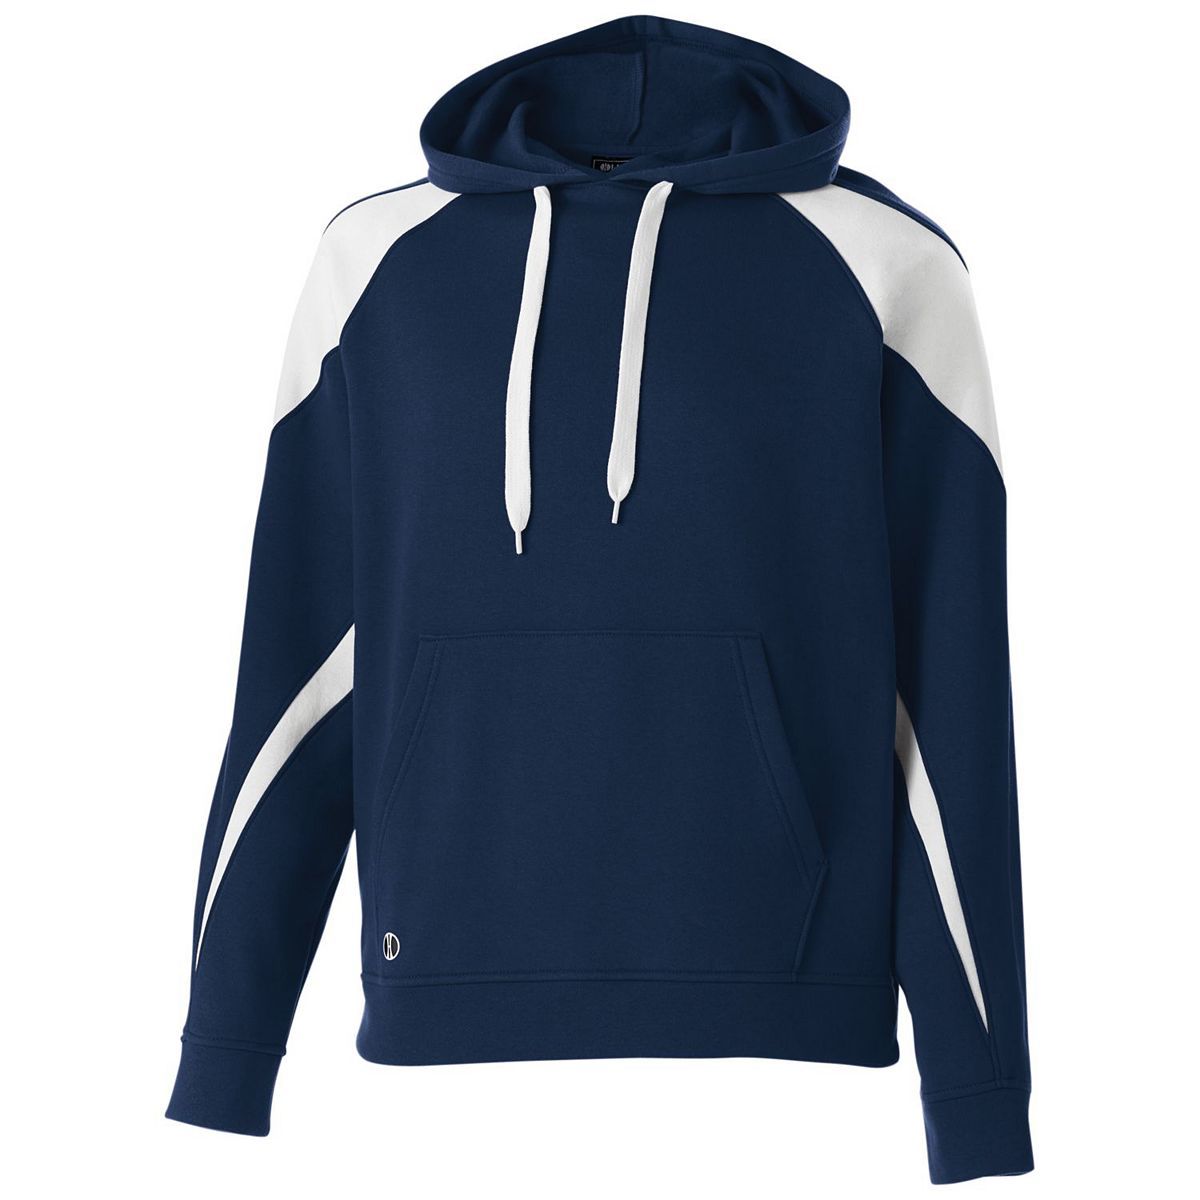 Holloway Youth Prospect Hoodie in Navy/White  -Part of the Youth, Youth-Hoodie, Hoodies, Holloway product lines at KanaleyCreations.com